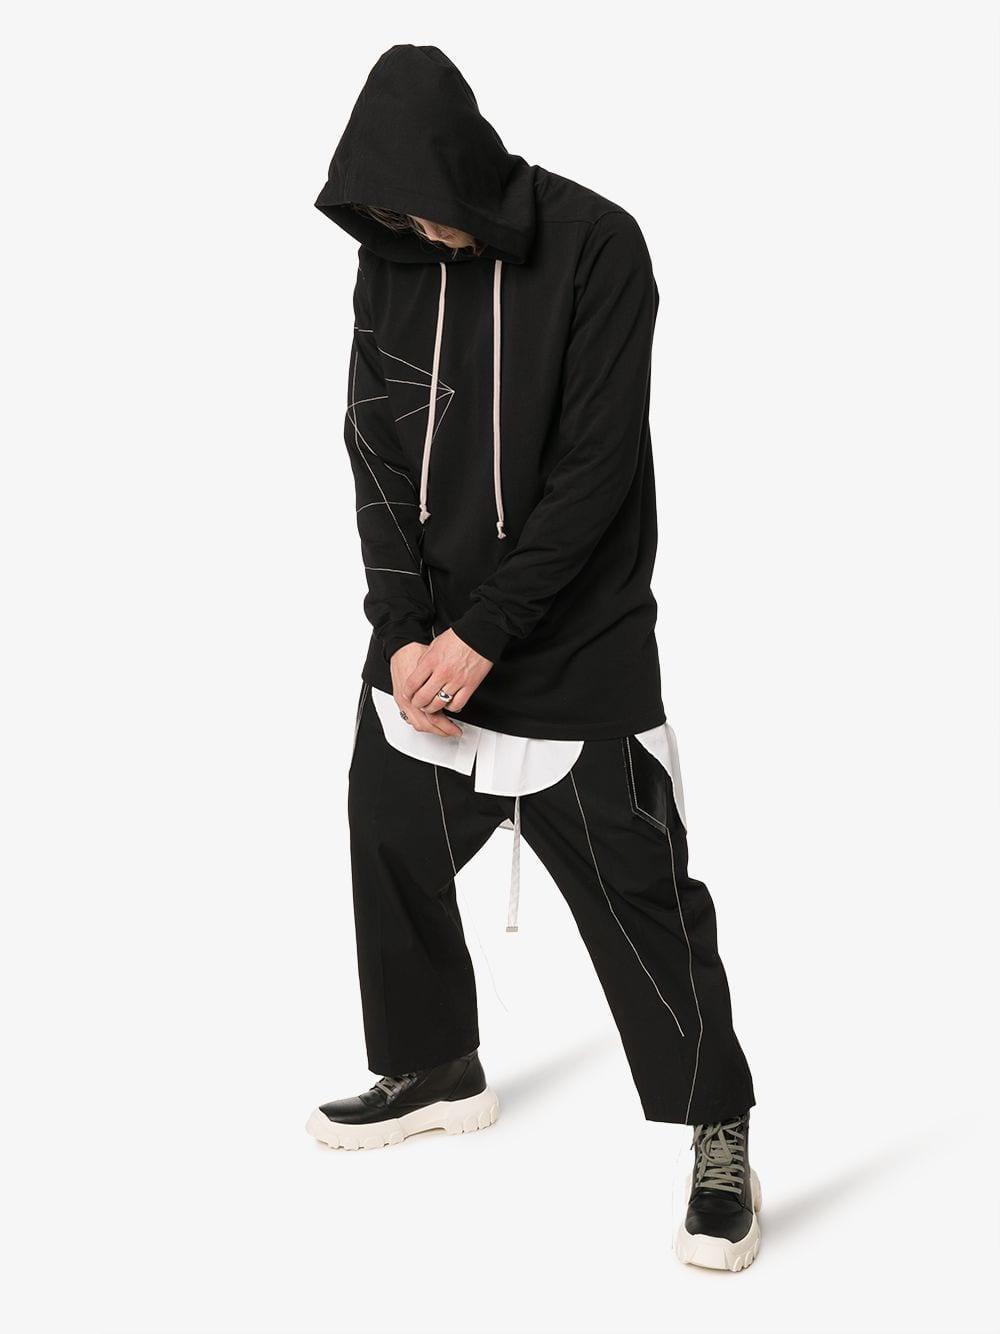 Rick Owens Babel Embroidered Cotton Hoodie in Black for Men - Lyst